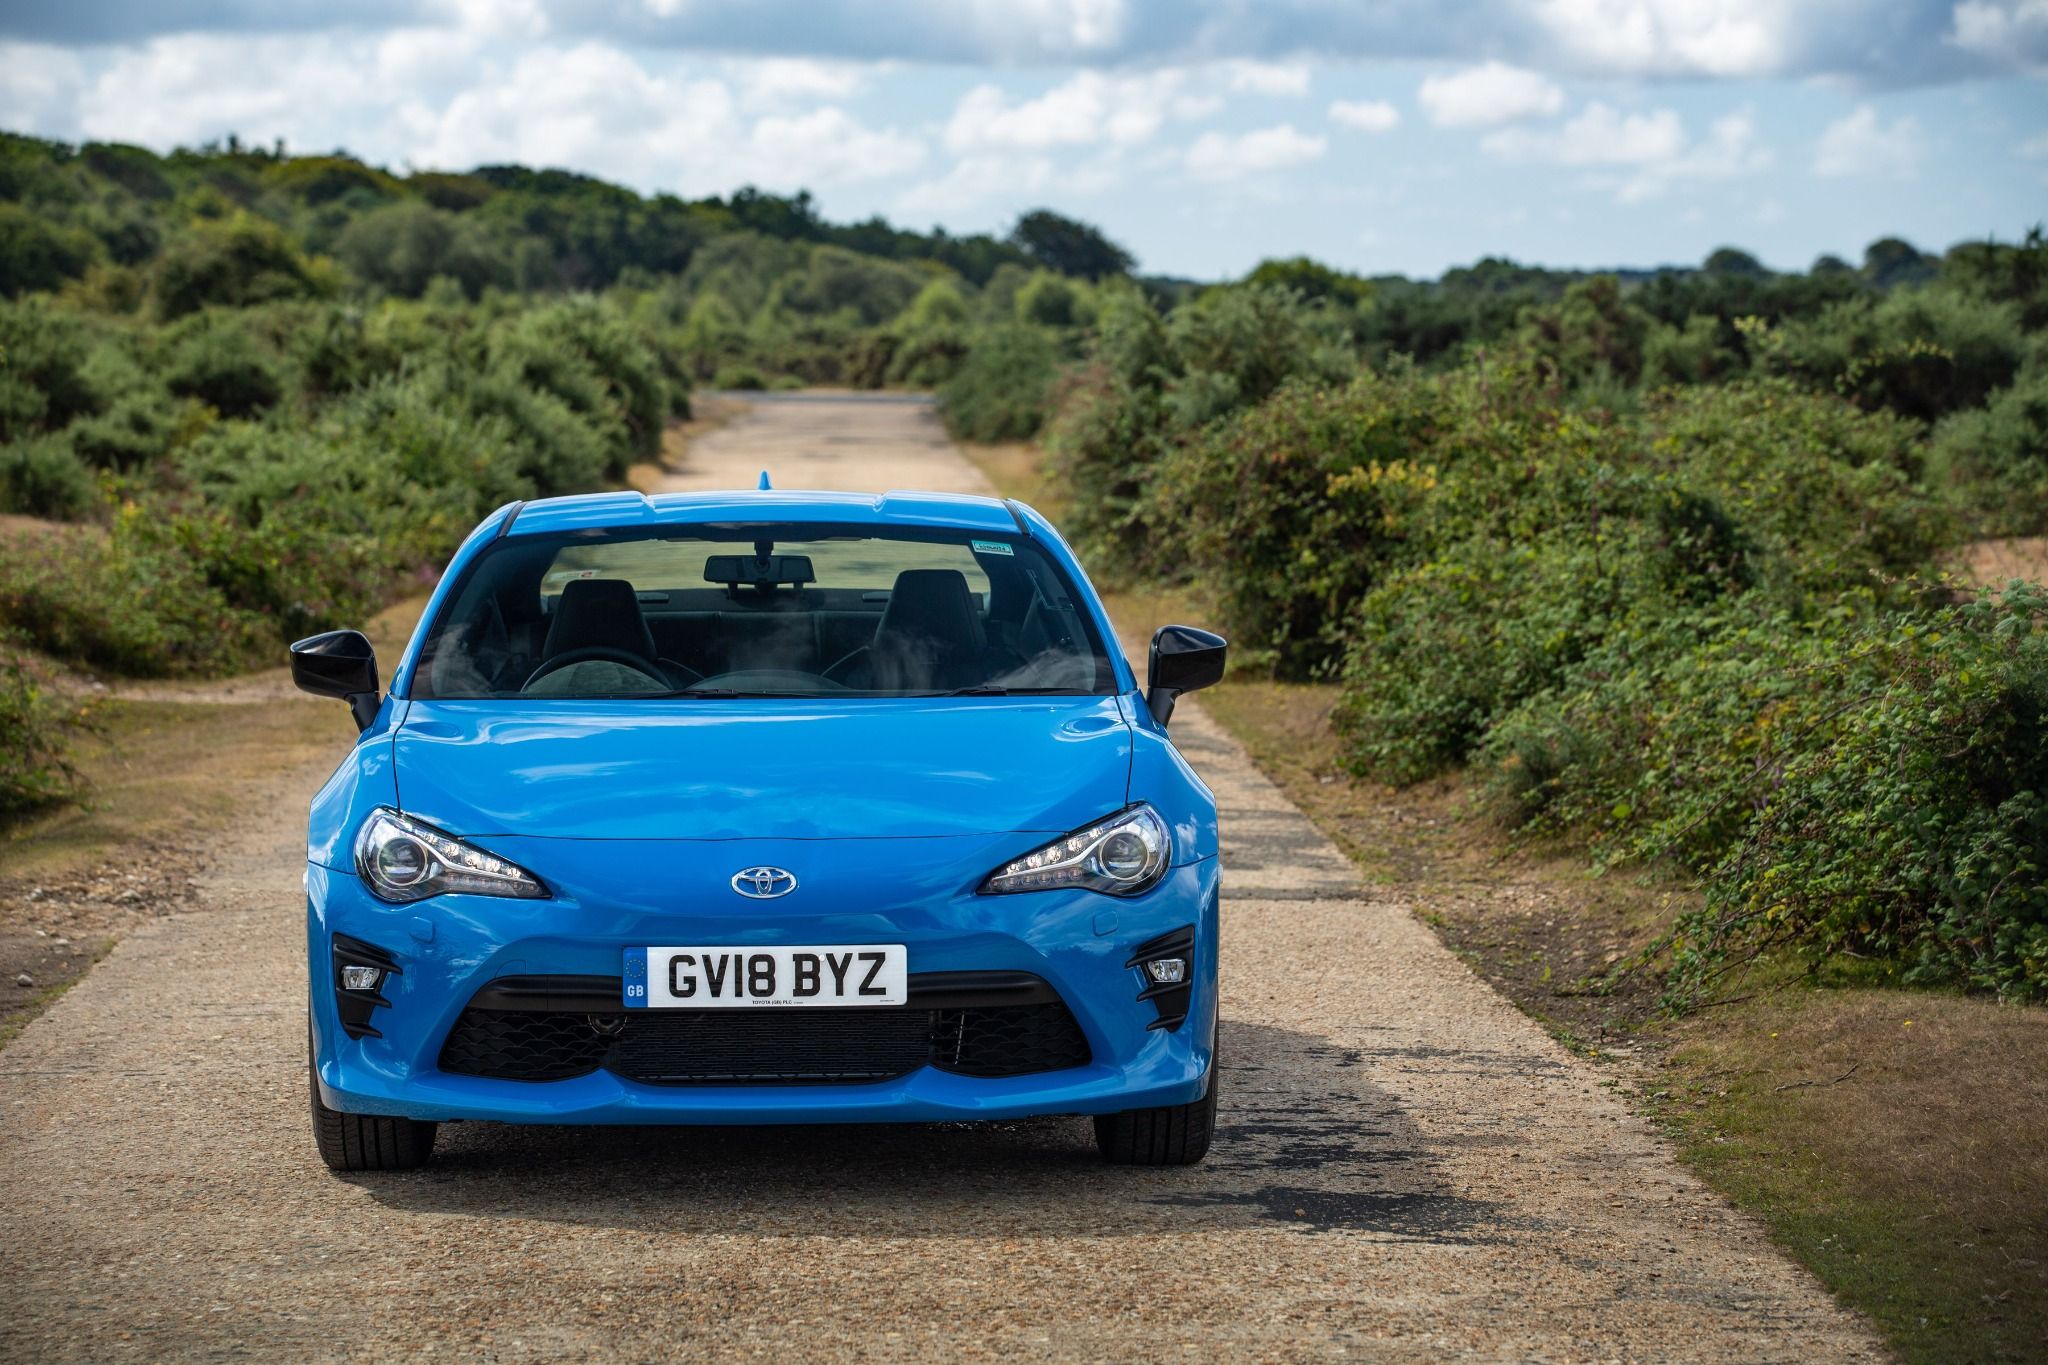 Front view of a blue Toyota GT86